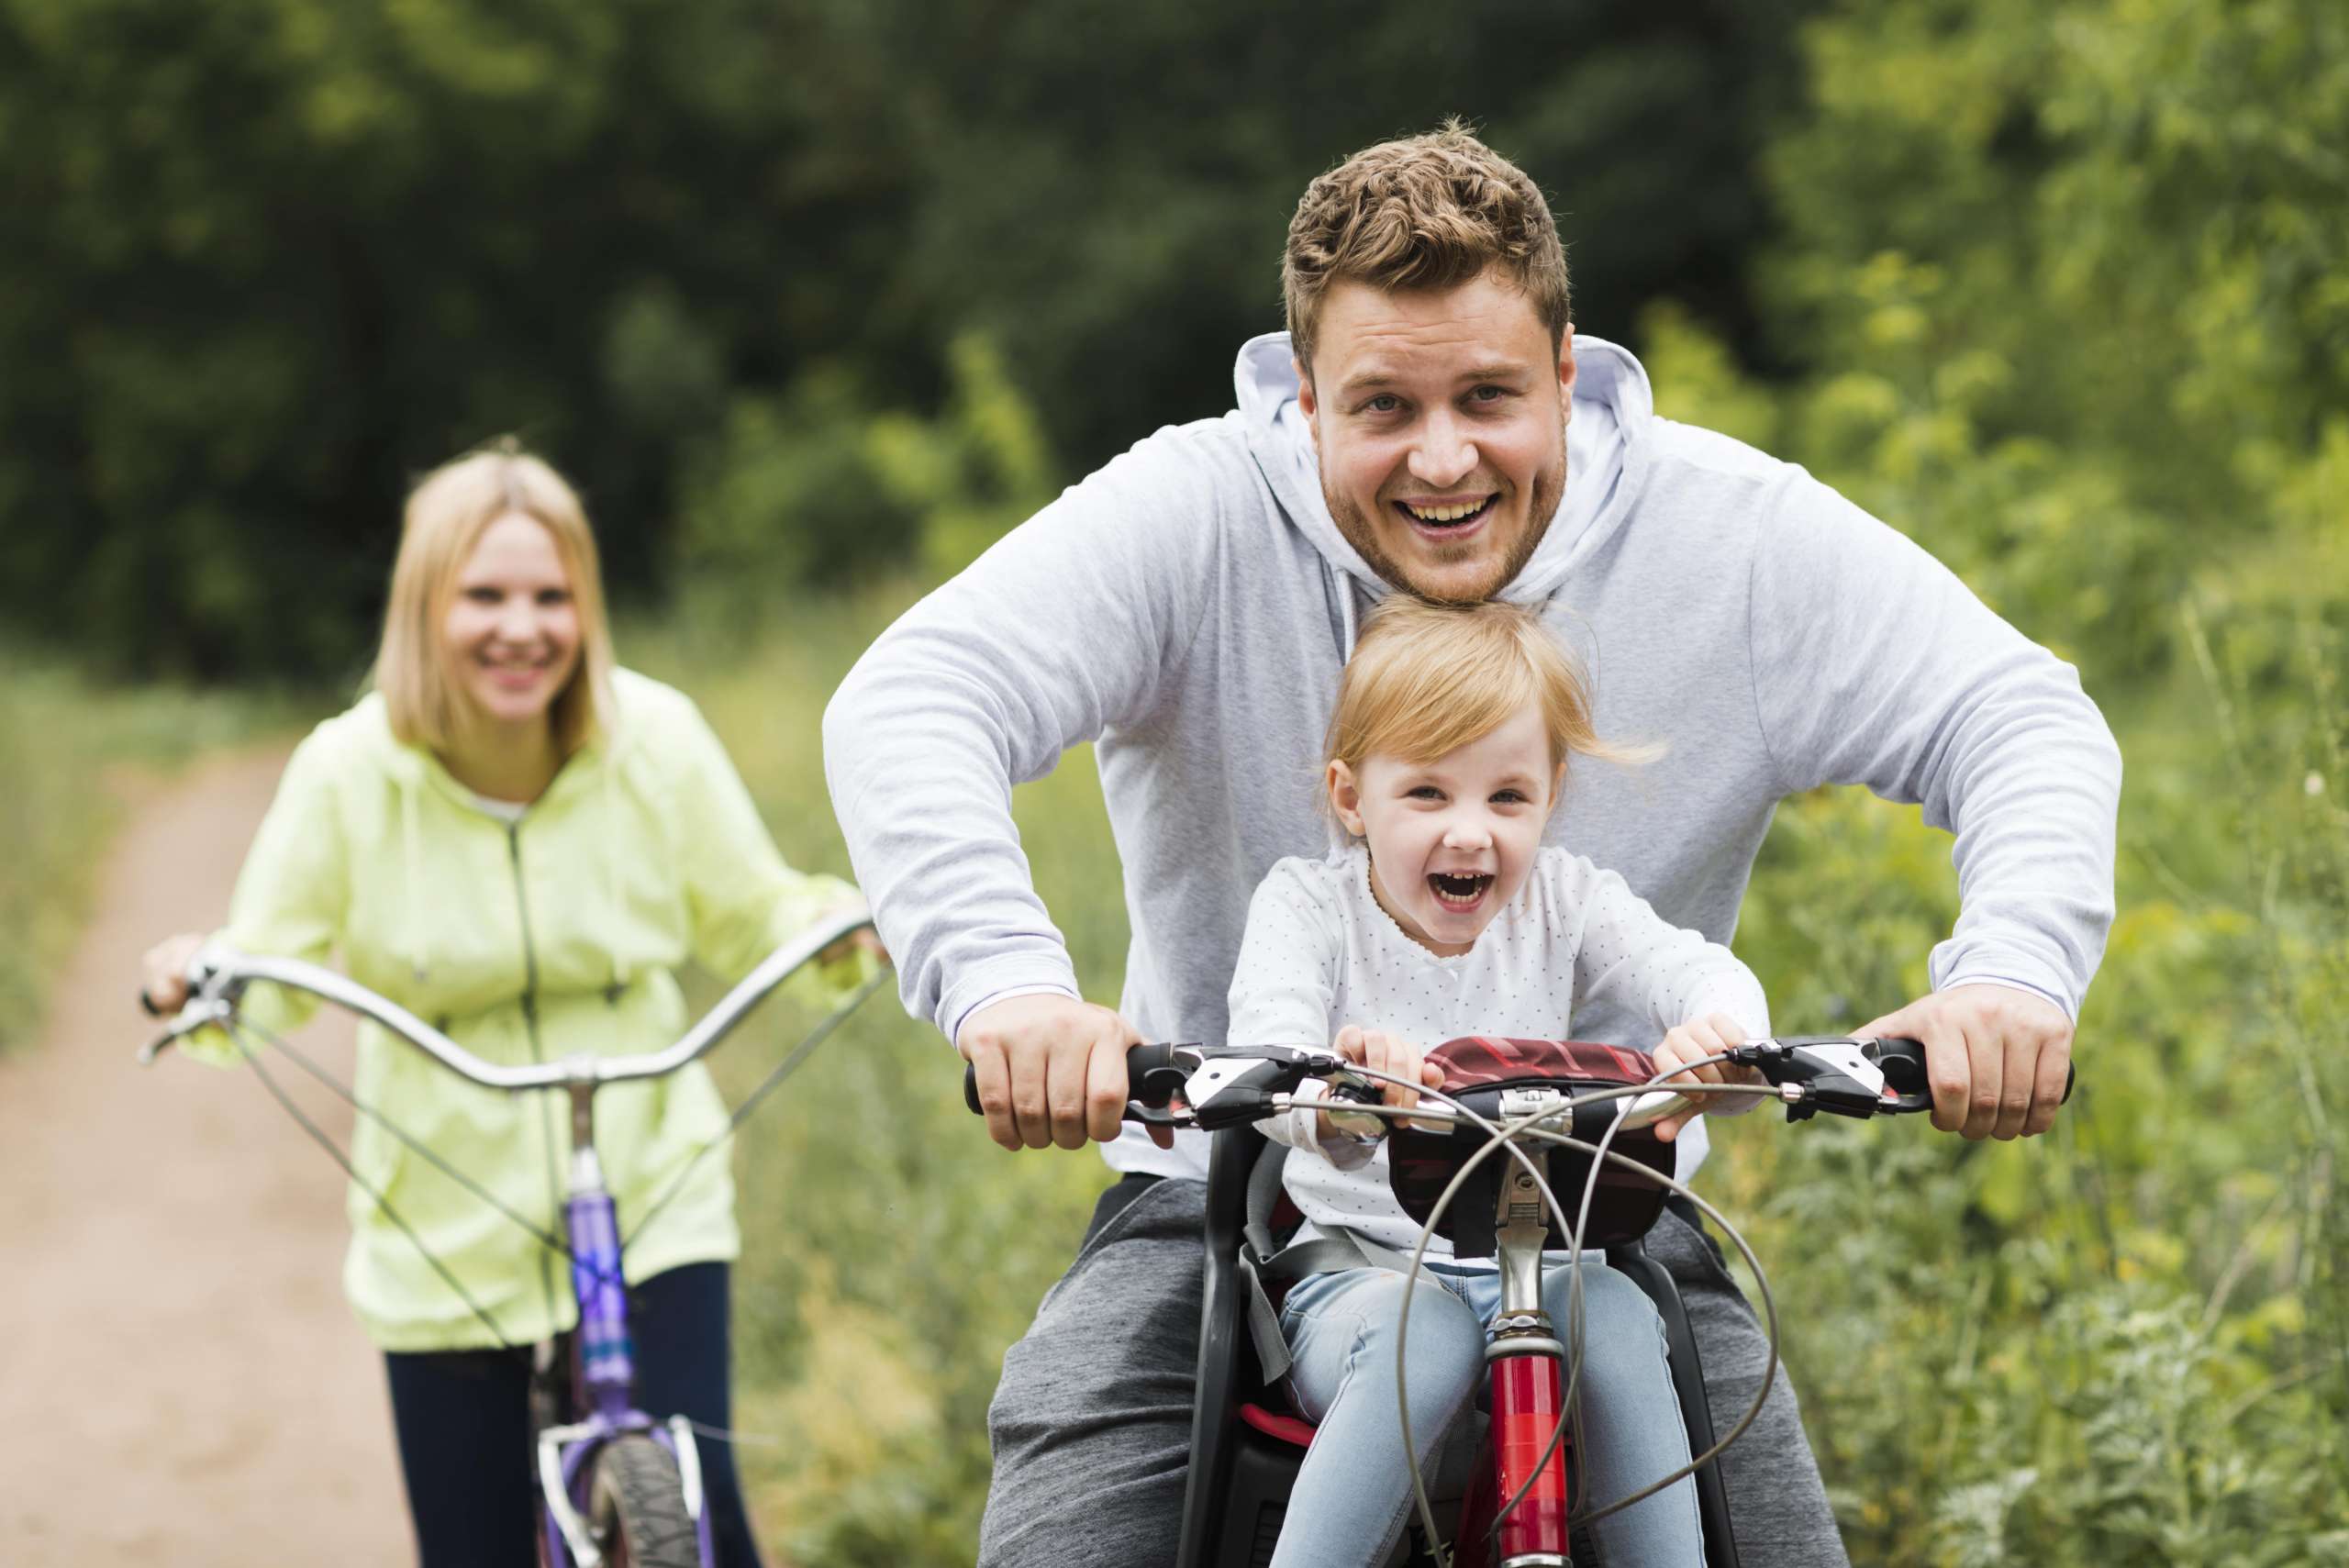 How to prepare for a family bike tour?